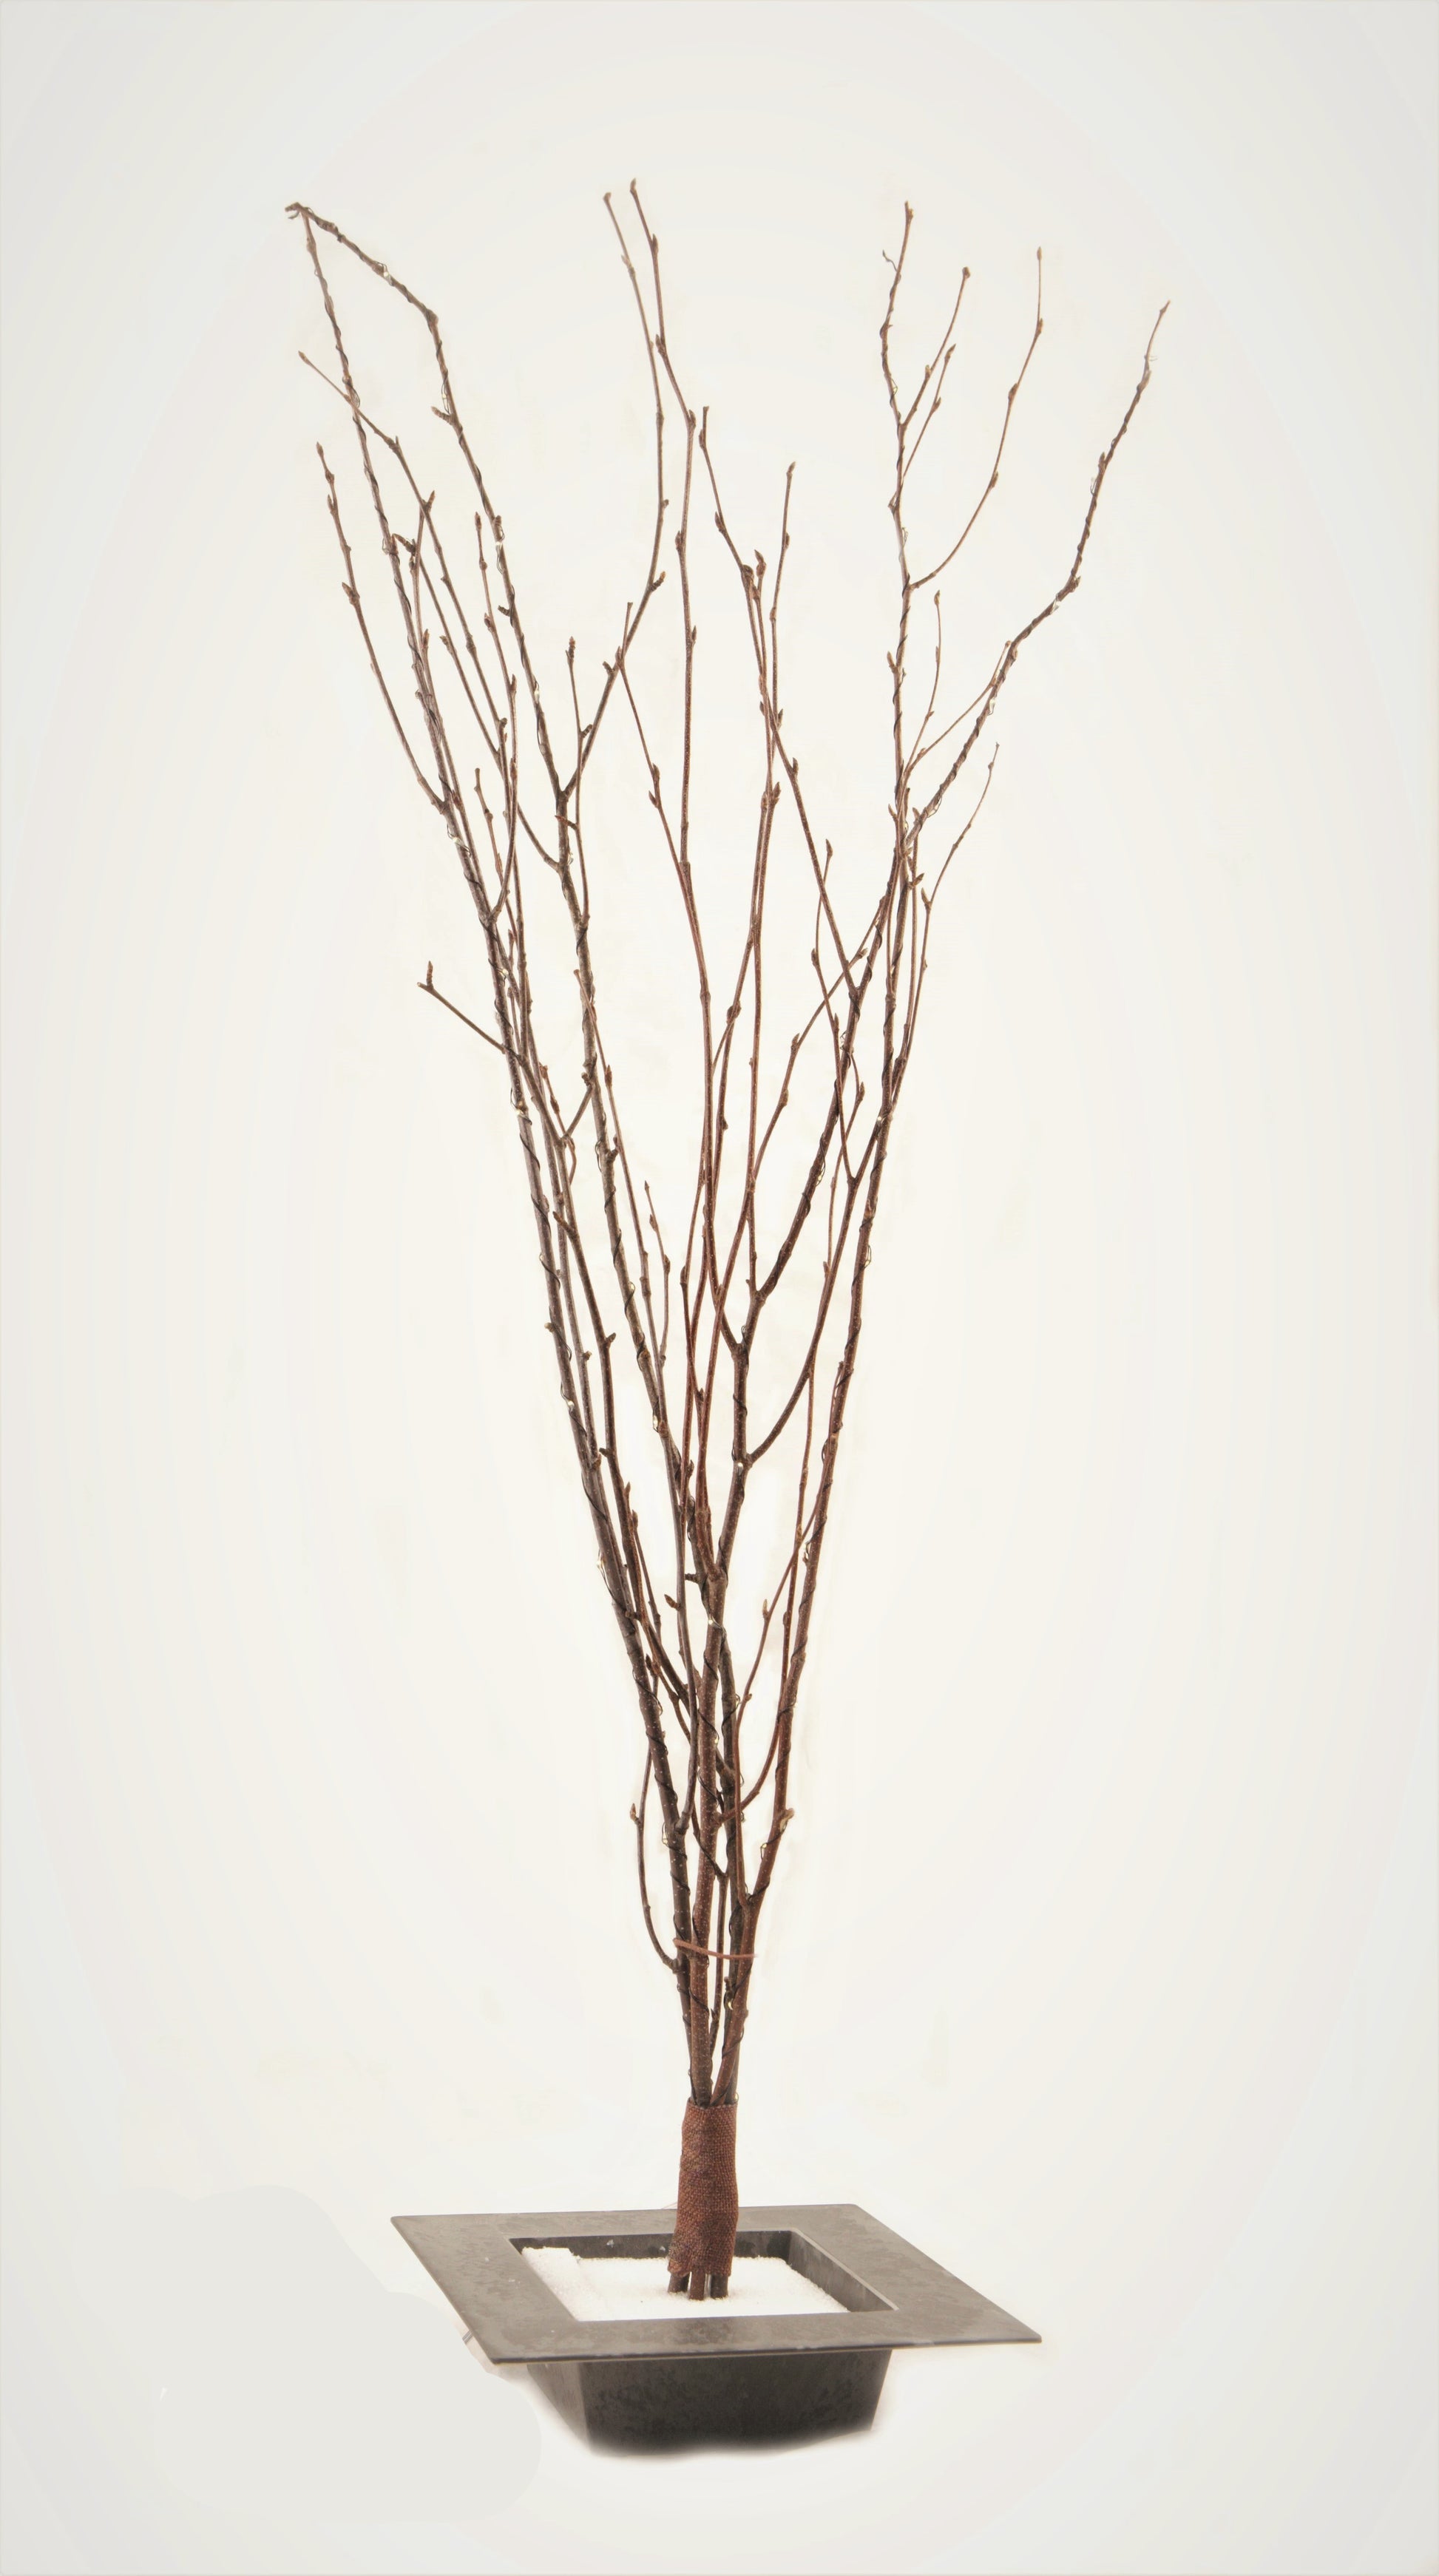 Natural Red White Birch Twigs 3-4 Foot Branches Floor Vase Tall Branch